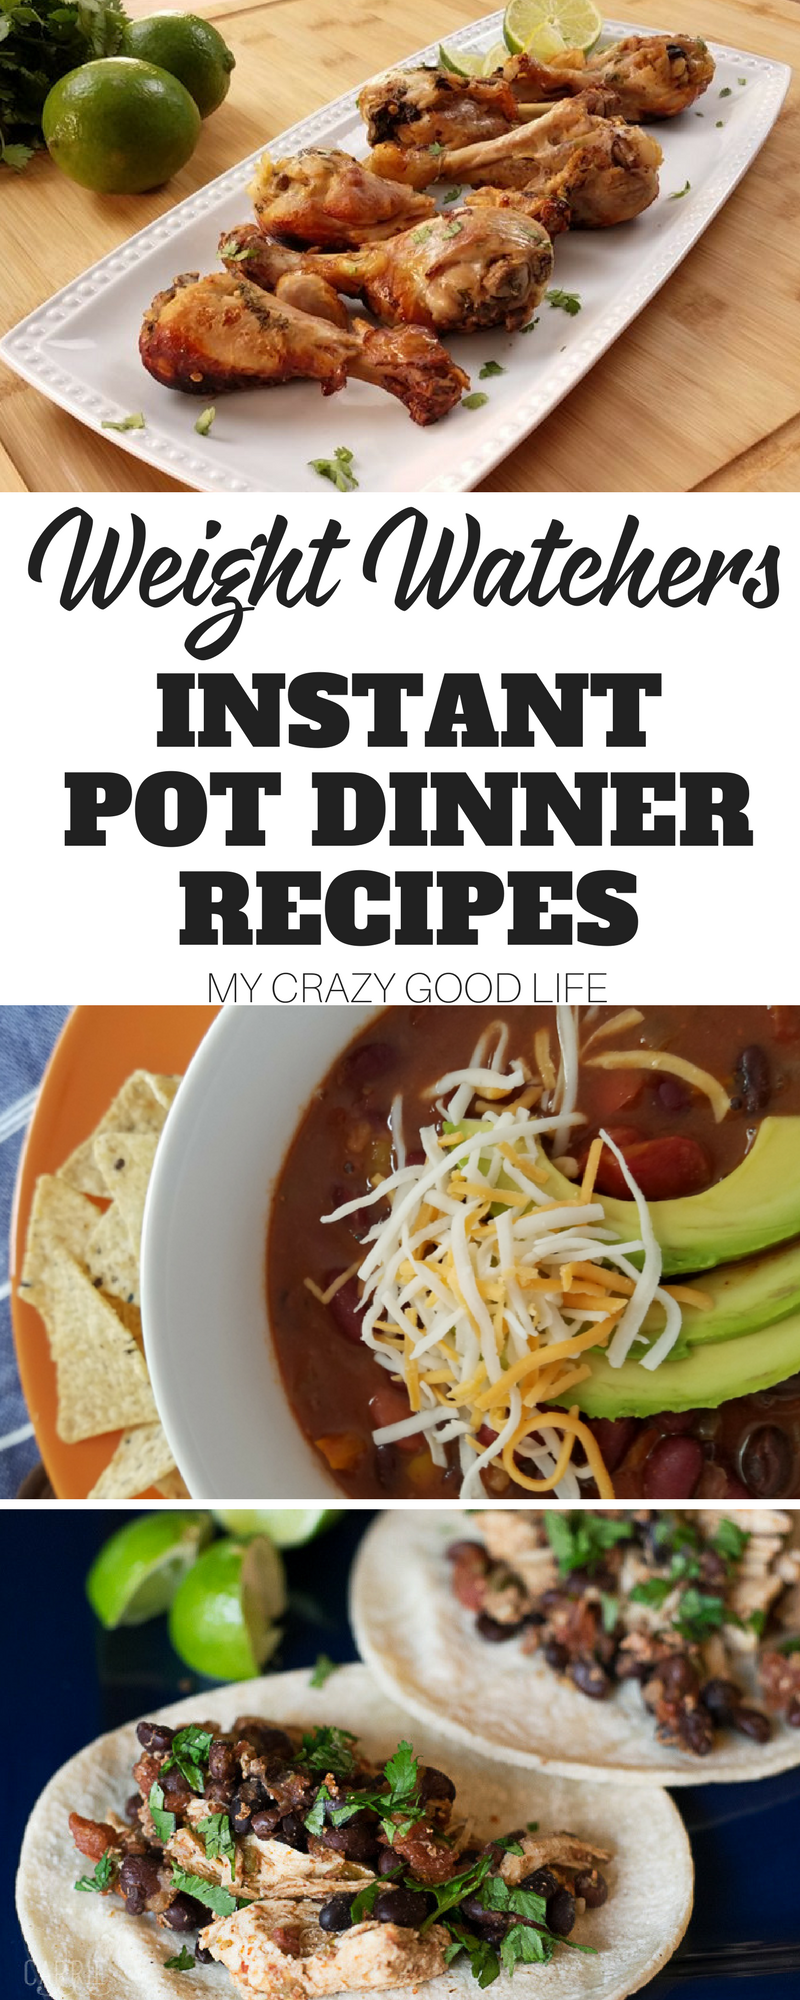 It's no secret that I love my Instant Pot, they make meal time a breeze. If you are on Weight Watchers or any other healthy eating plan, you won't want to miss this collection of delicious recipes. These Weight Watchers Instant Pot dinners all have IP directions and WW points calculated and ready to go! #instantpot #recipes #dinners #weightwatchers